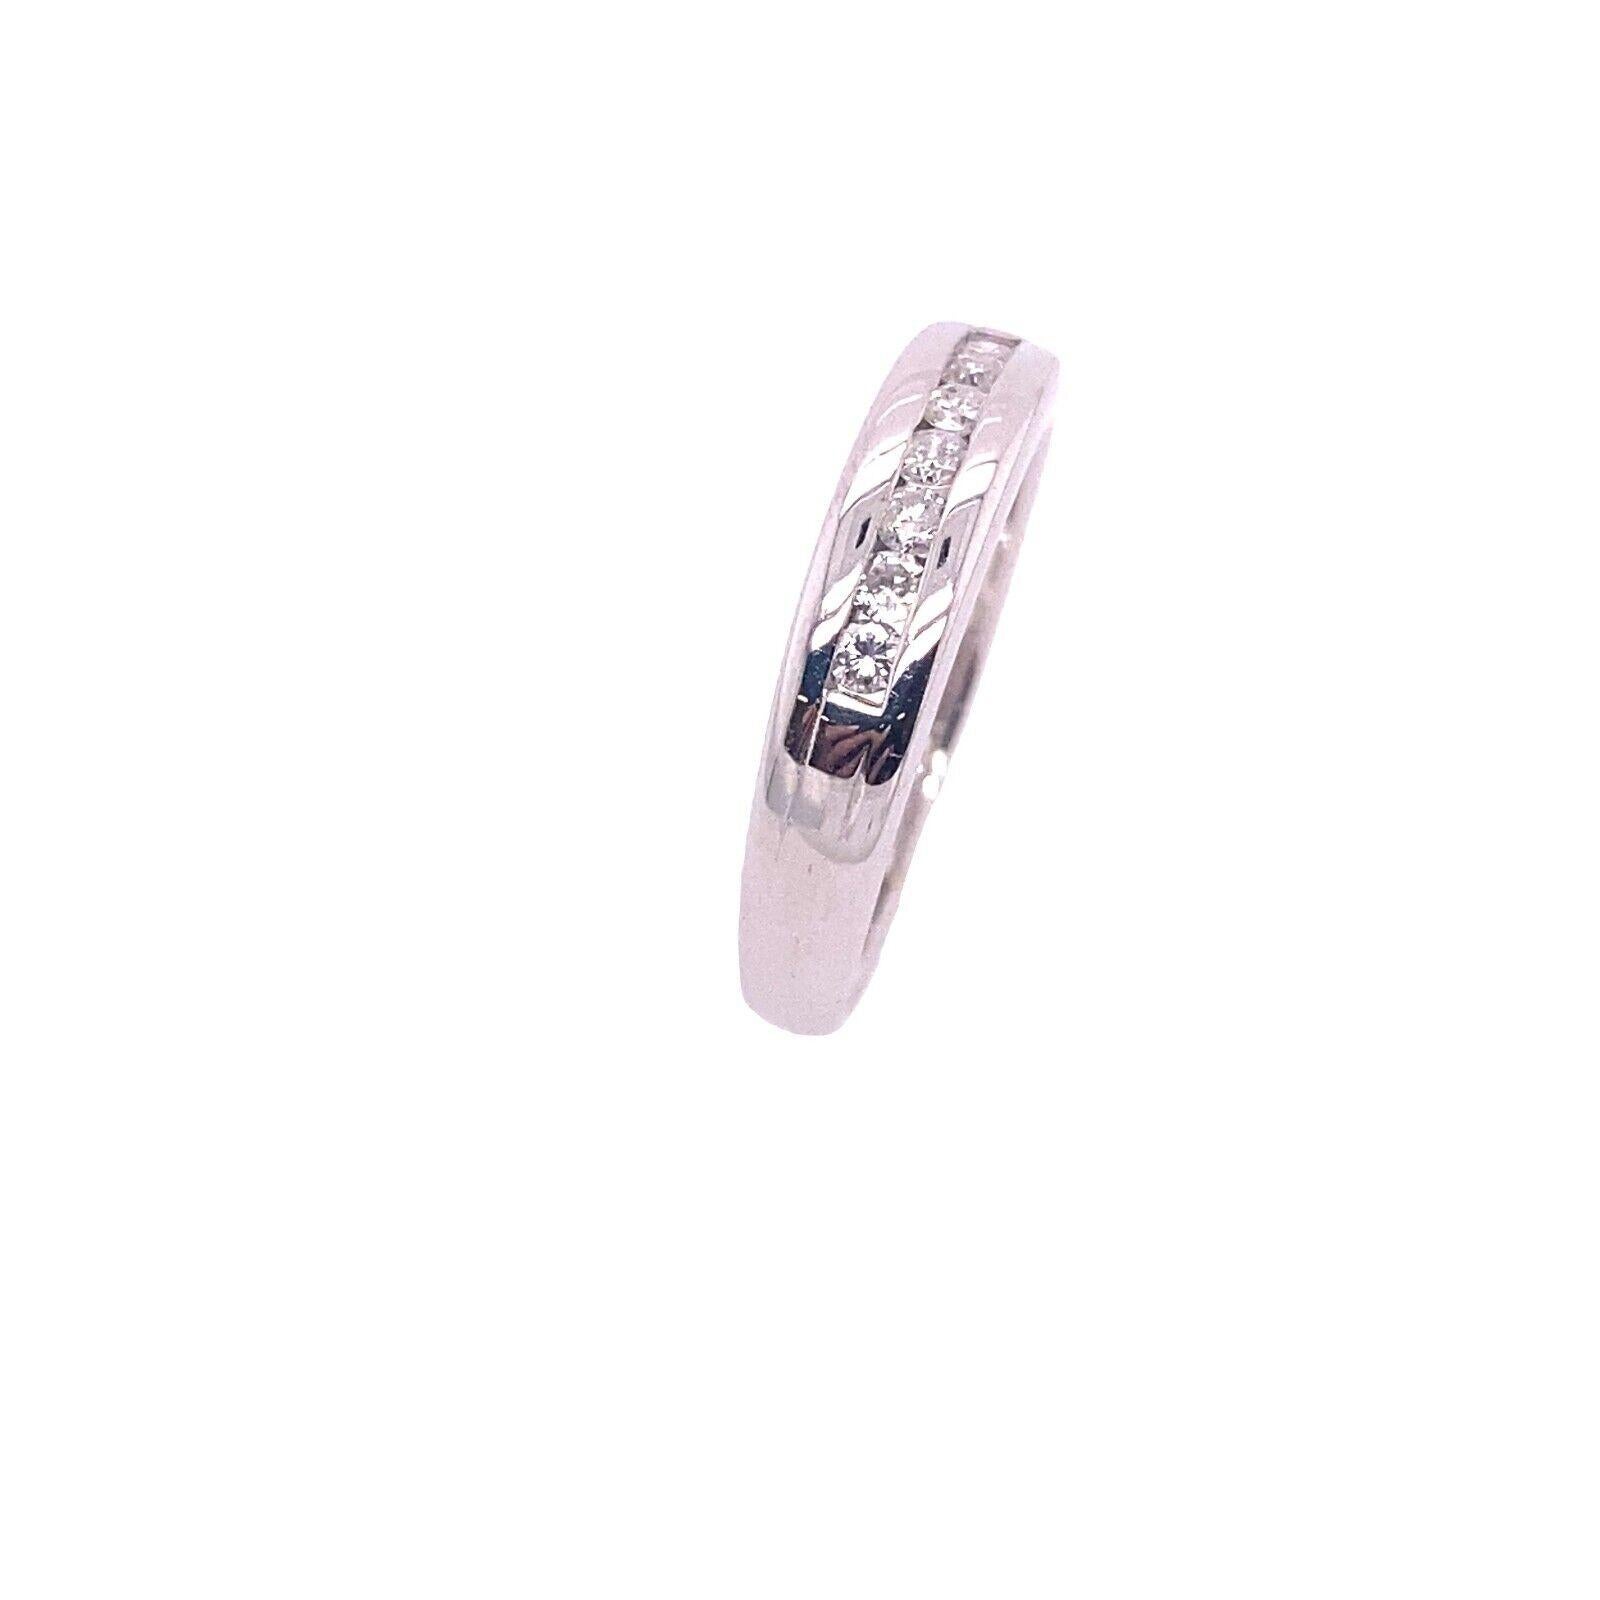 Diamond Eternity/Wedding Band Set with 0.20ct of Diamonds in 18ct White Gold

This wedding band is gorgeous and can be worn as an eternity ring. It features a row of 0.20ct diamonds set into a 18ct white gold shank. The diamonds are all round